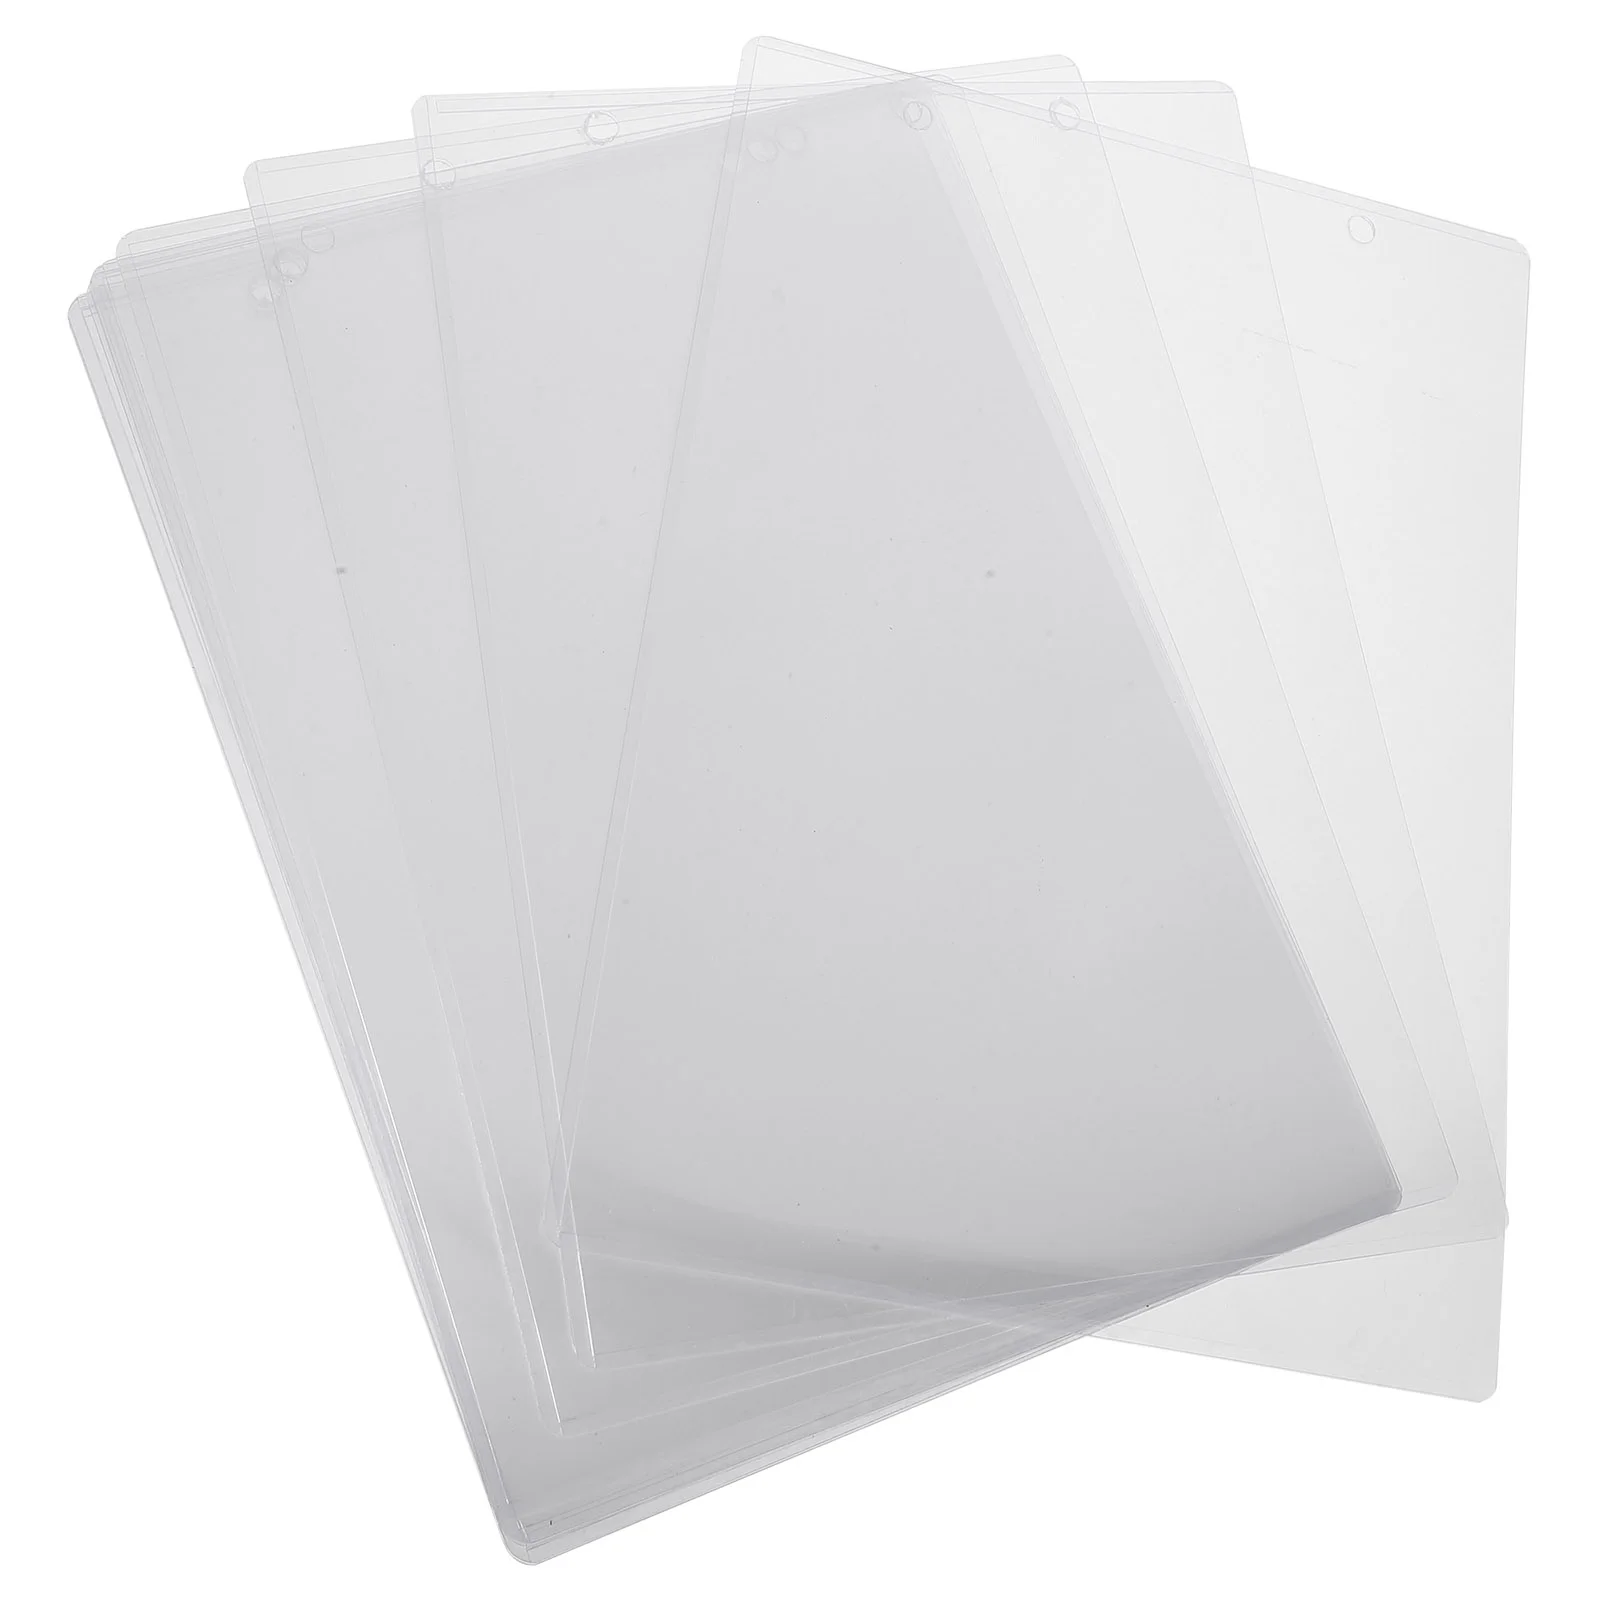 

10 Pcs Clear Paper Protectors Magazine Sleeves Protective Peg Hooks Page Abs Card Magnetic